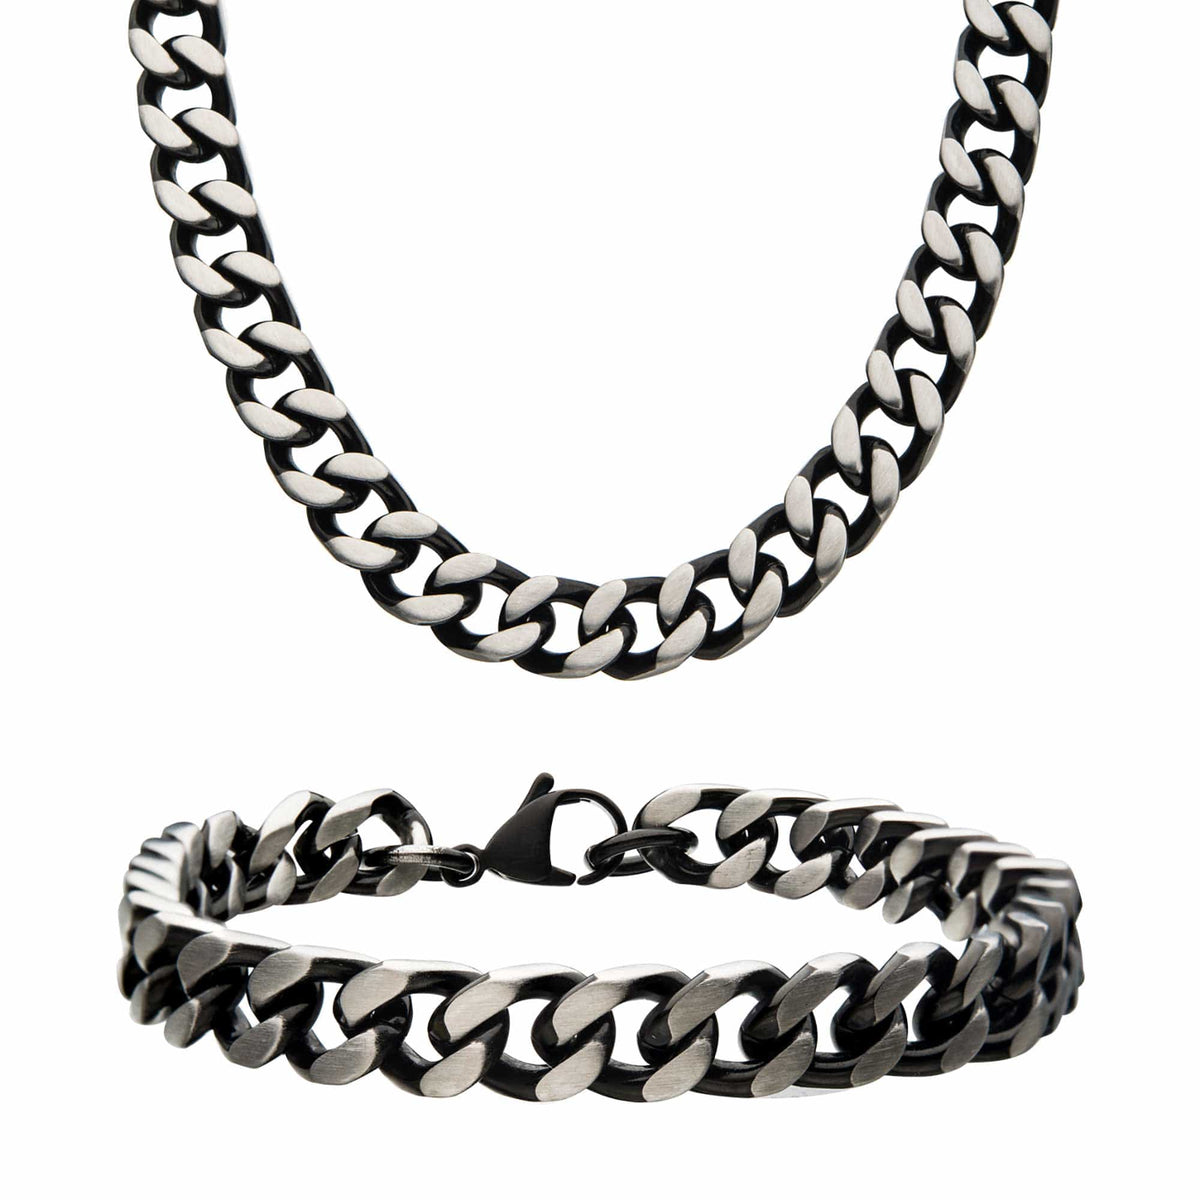 INOX JEWELRY Chains Black and Silver Tone Stainless Steel 8mm Brushed Curb Chain and Bracelet Set NSTC1208-SET